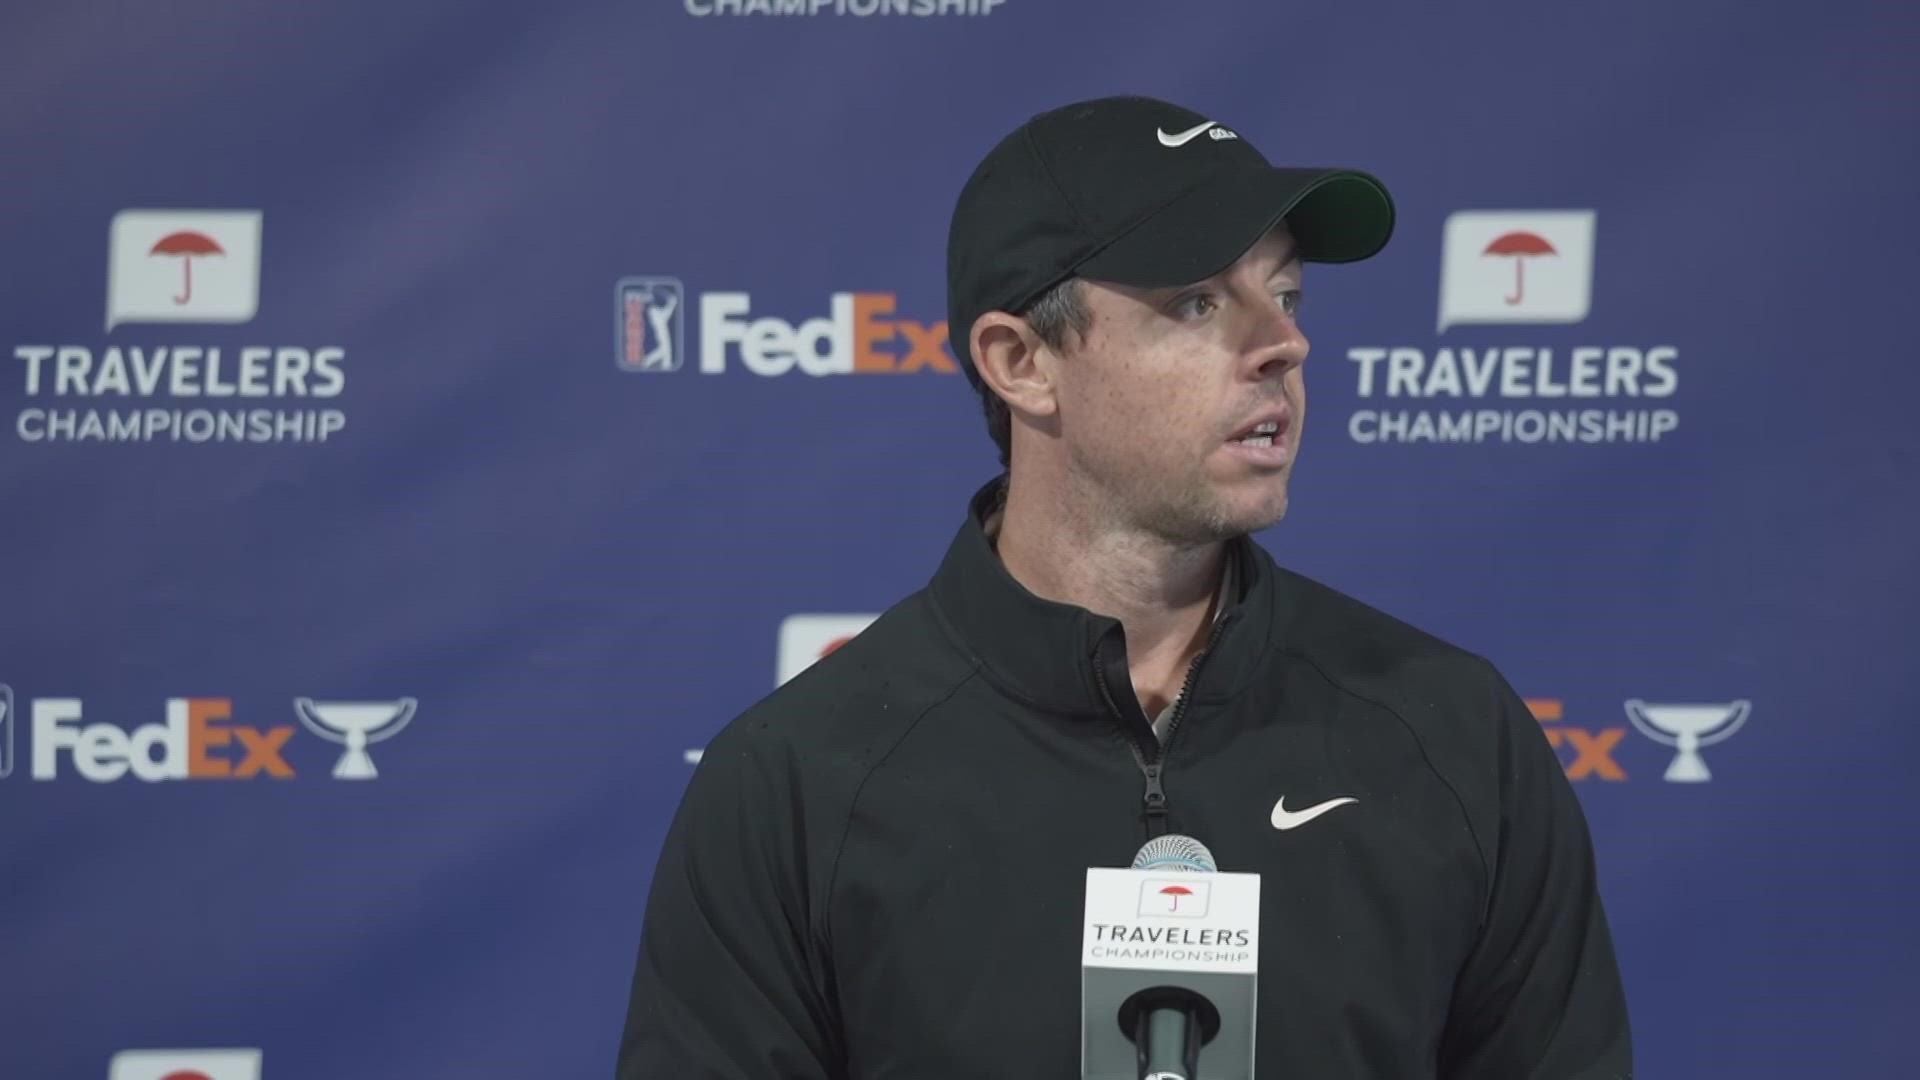 Rory McIlroy offered some of the harshest criticism of PGA Tour players who have joined the LIV Golf Invitational Series. This is his full interview from Travelers.